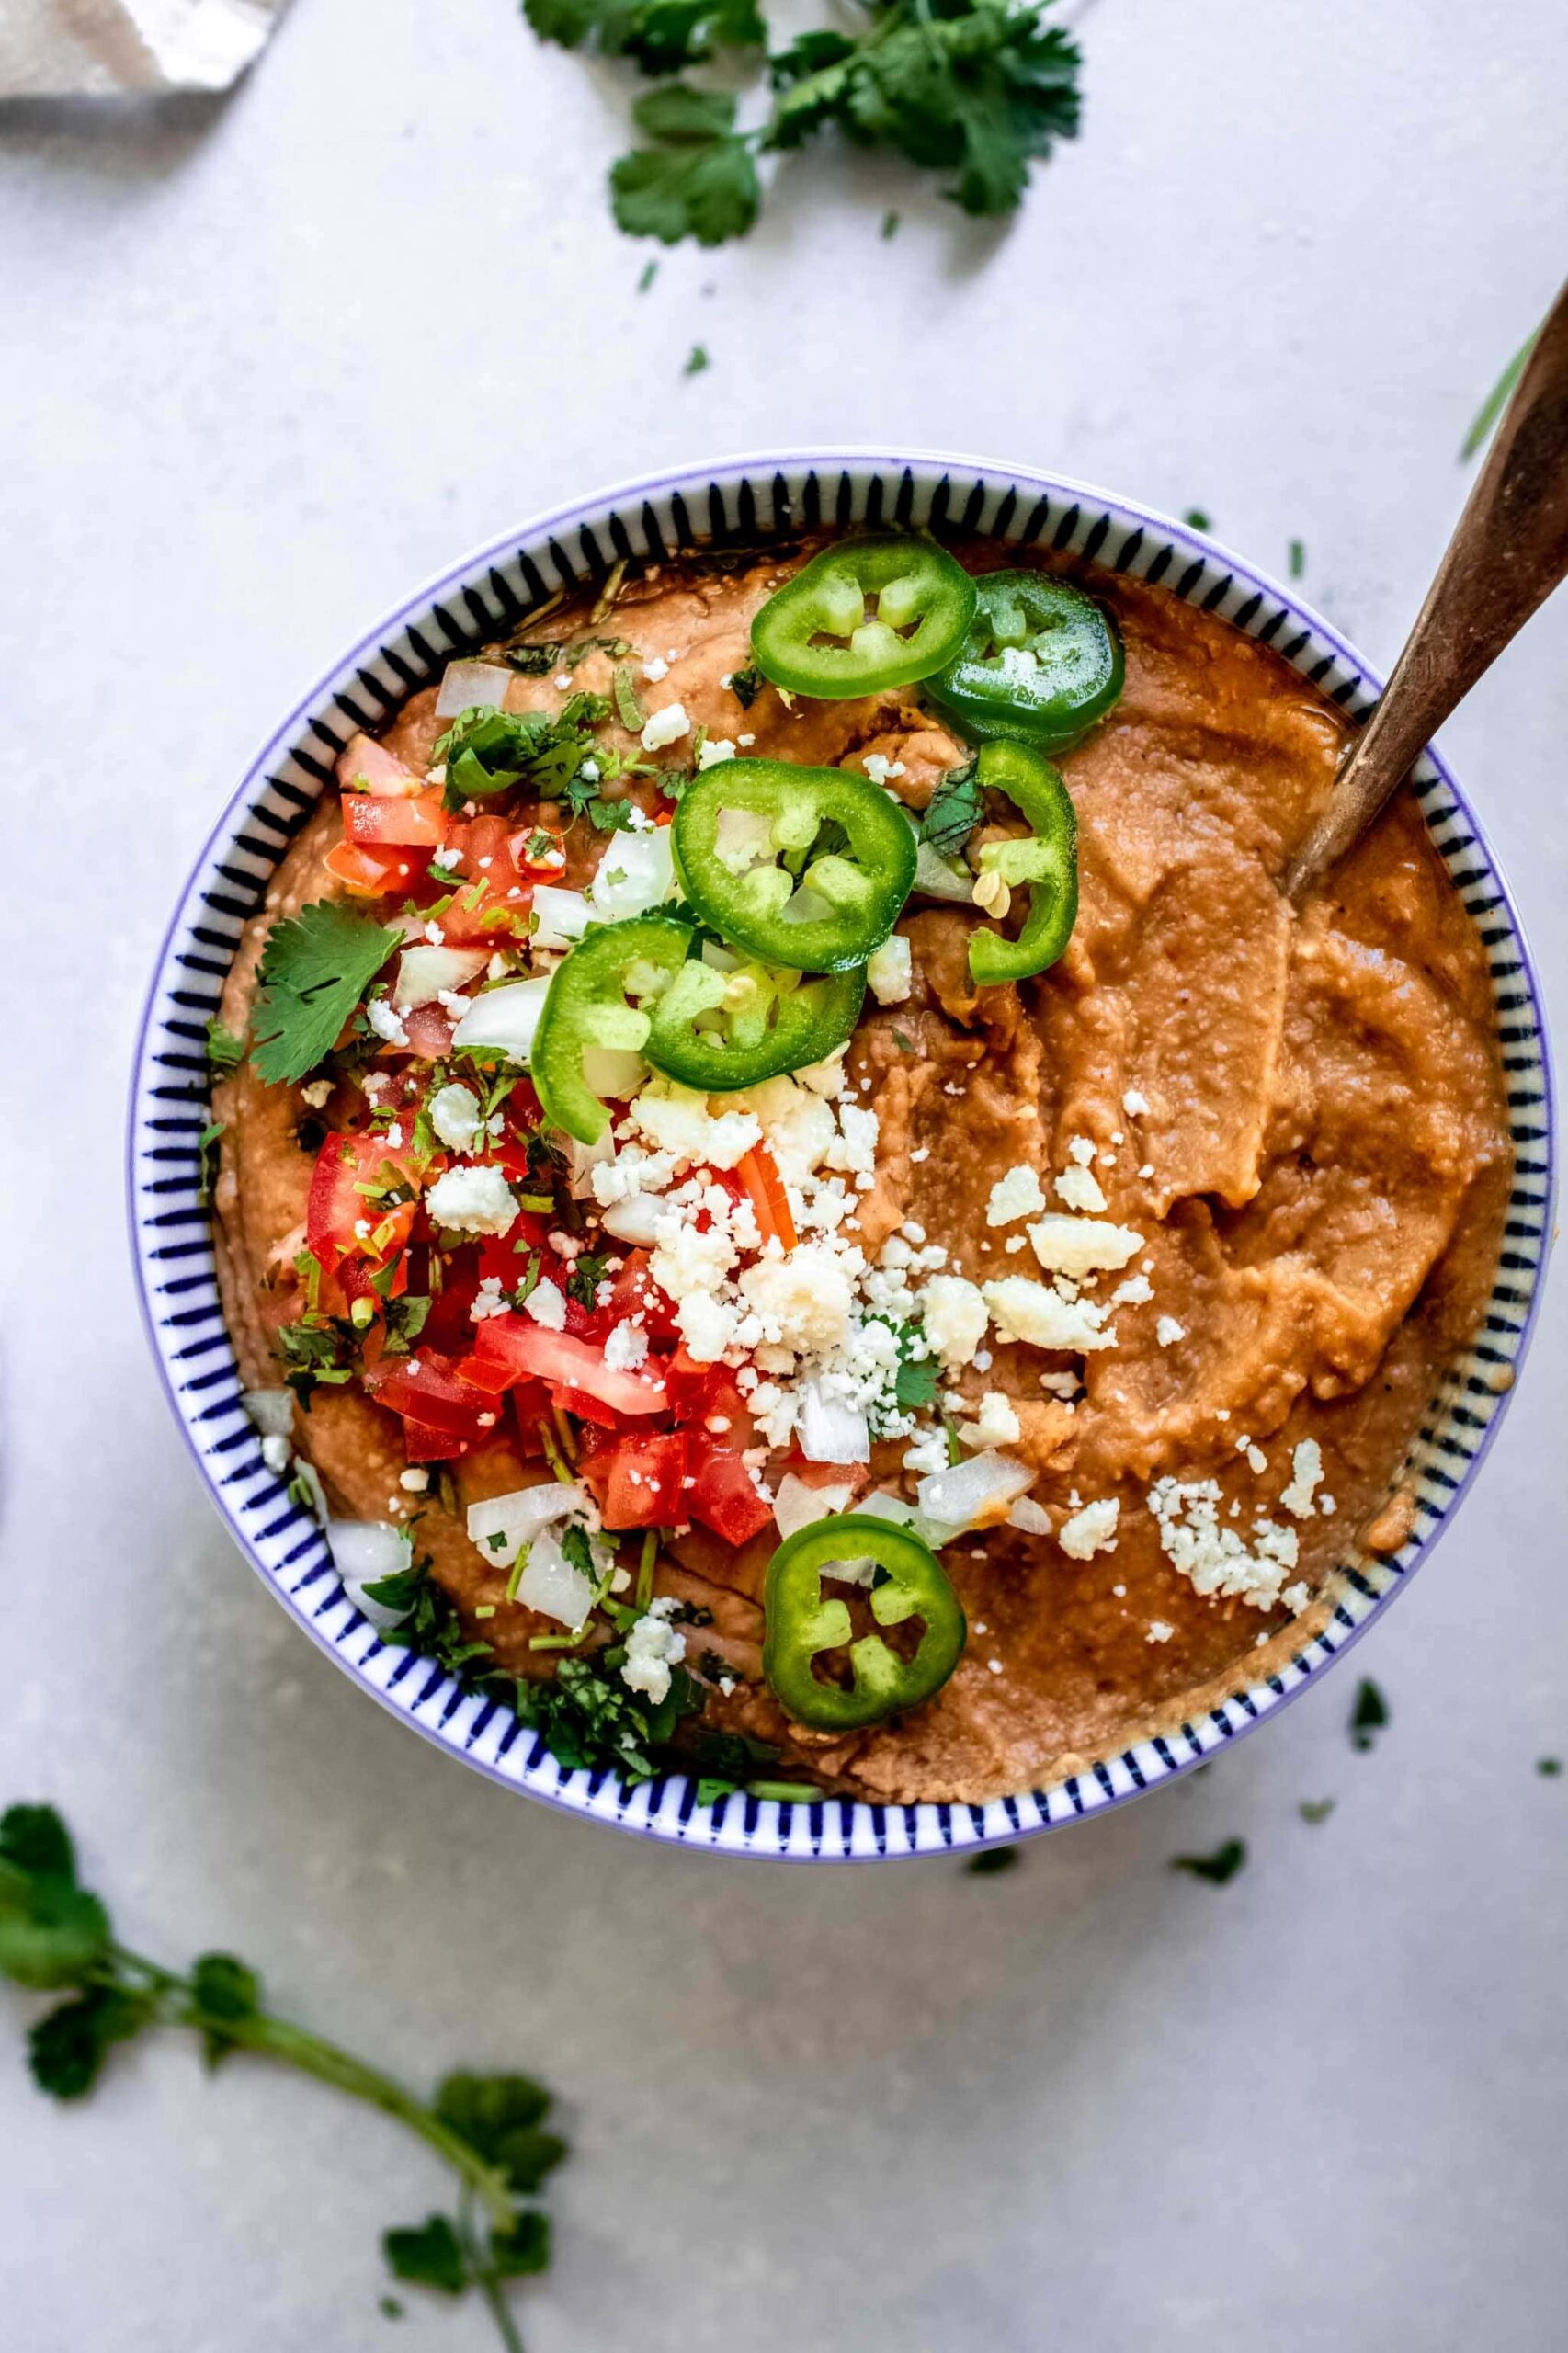  These Refried Beans are packed with fiber and plant-based protein